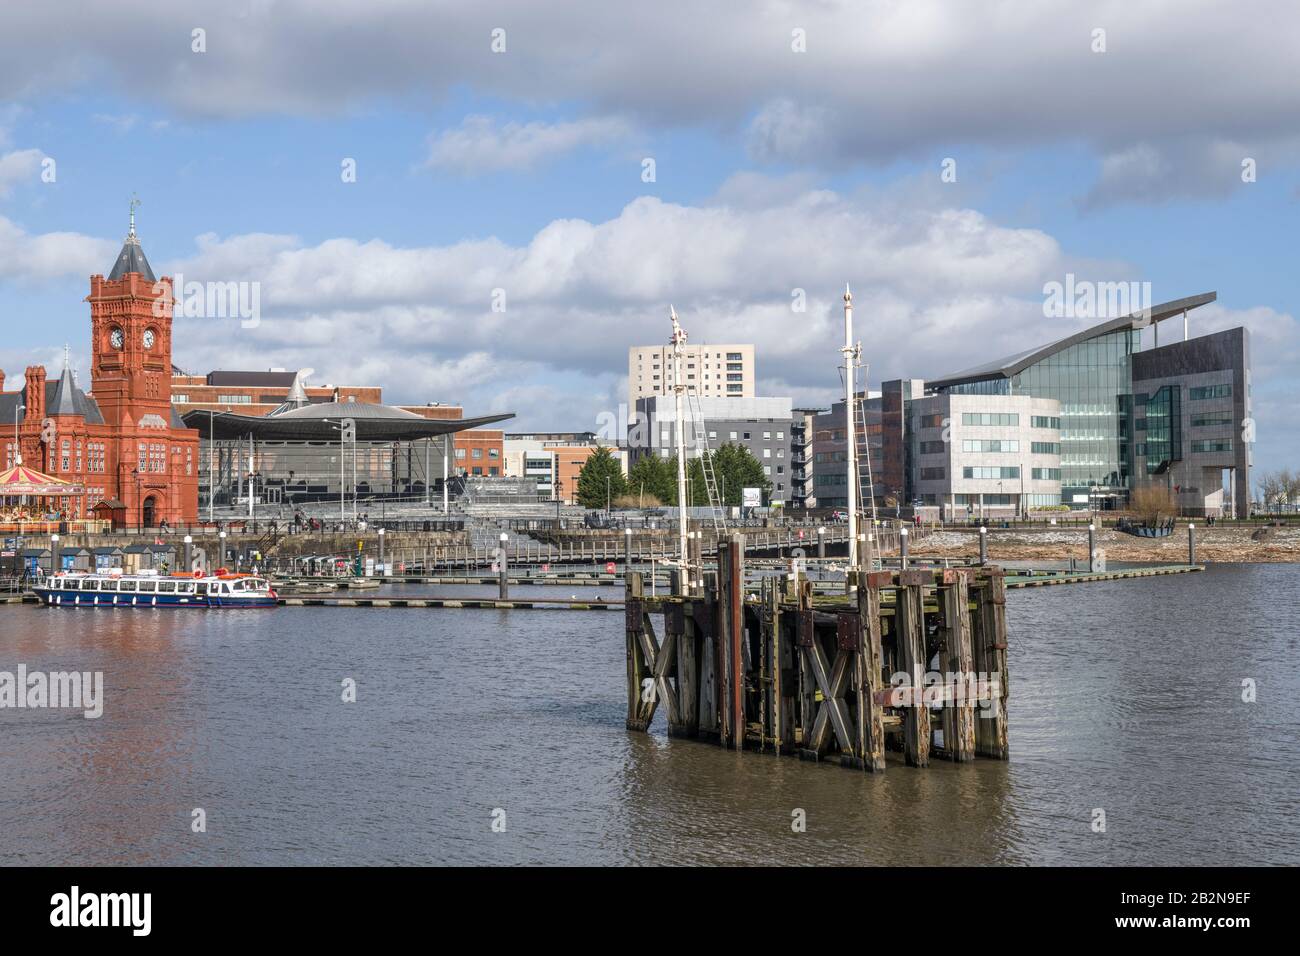 Cardiff Bay showing the old moorings or dolphins used by ships to moor to when being repaired. Stock Photo